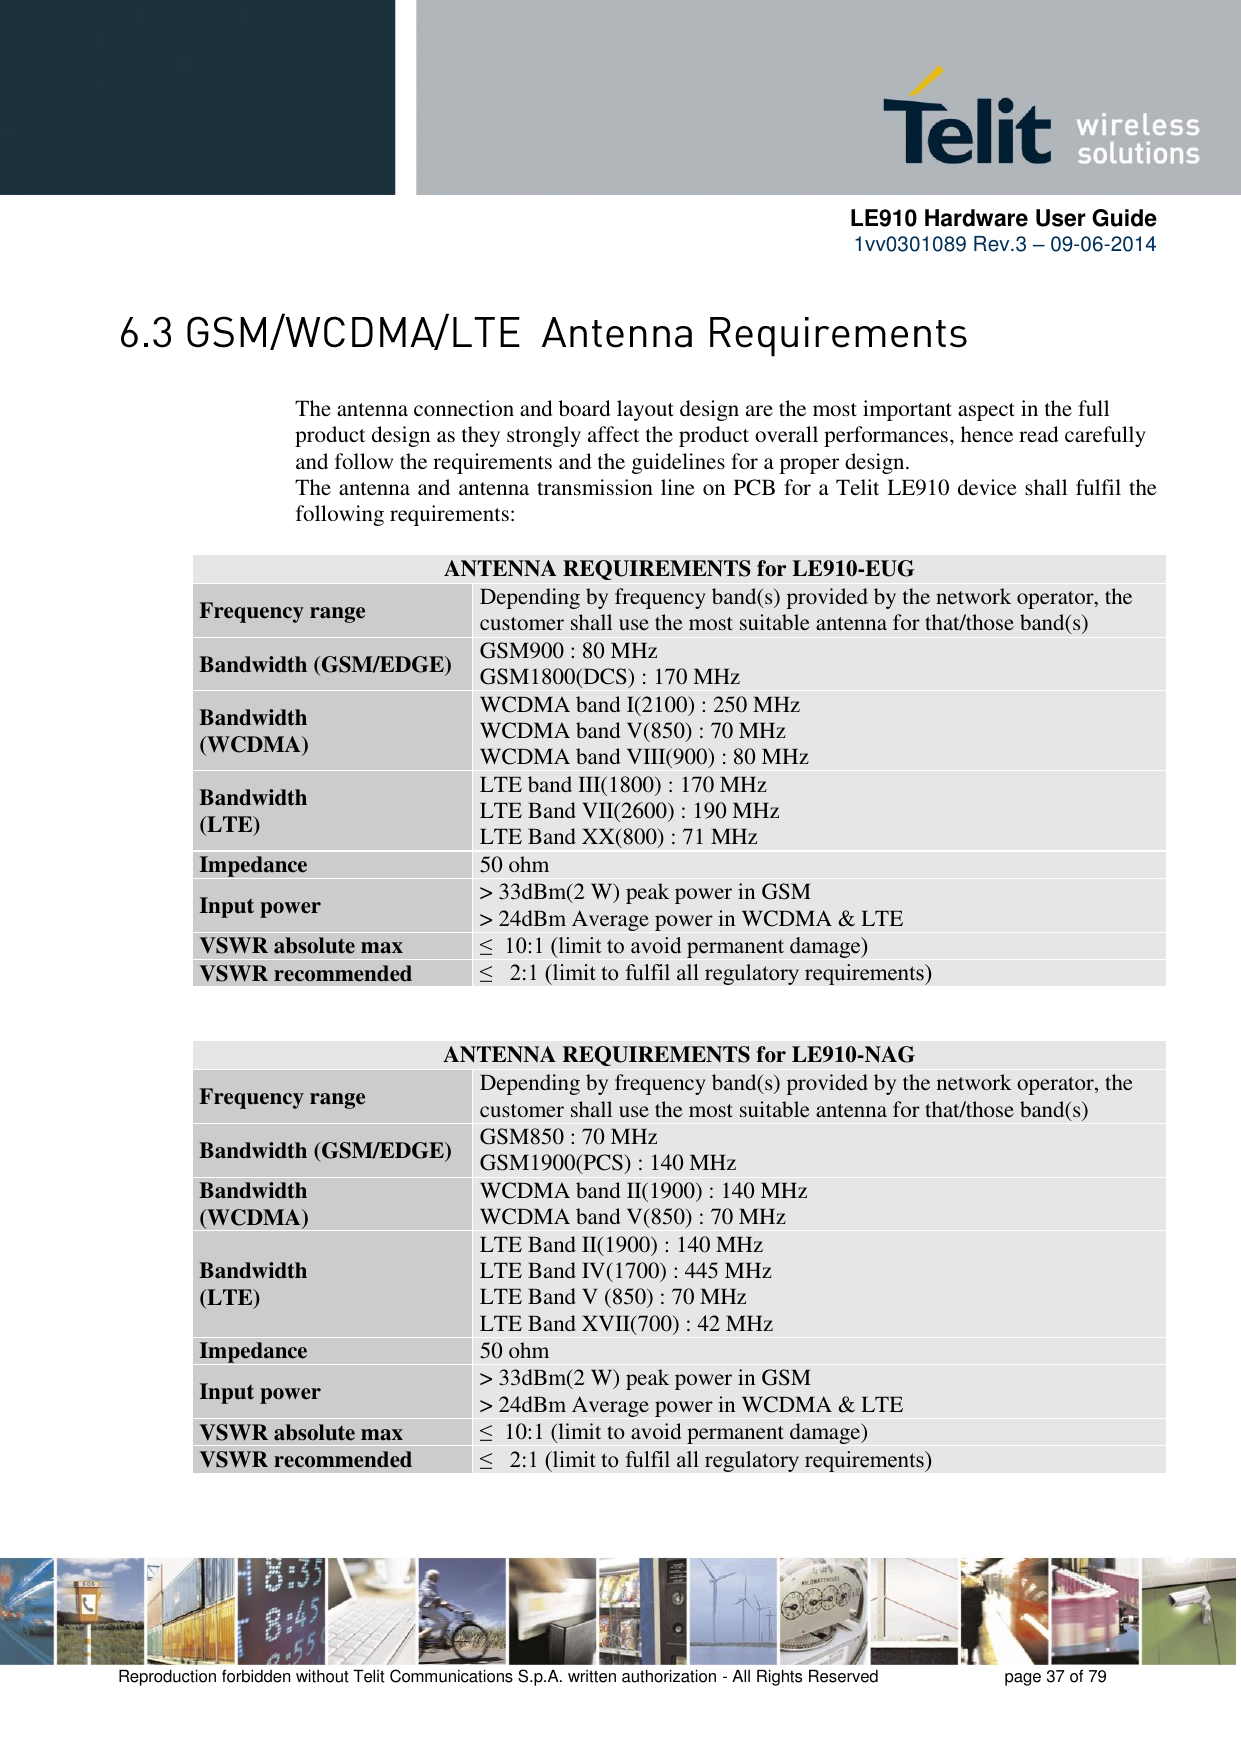      LE910 Hardware User Guide 1vv0301089 Rev.3 – 09-06-2014    Reproduction forbidden without Telit Communications S.p.A. written authorization - All Rights Reserved    page 37 of 79   The antenna connection and board layout design are the most important aspect in the full product design as they strongly affect the product overall performances, hence read carefully and follow the requirements and the guidelines for a proper design. The antenna and antenna transmission line on PCB for a Telit LE910 device shall fulfil the following requirements:   ANTENNA REQUIREMENTS for LE910-EUG Frequency range Depending by frequency band(s) provided by the network operator, the customer shall use the most suitable antenna for that/those band(s) Bandwidth (GSM/EDGE) GSM900 : 80 MHz  GSM1800(DCS) : 170 MHz  Bandwidth  (WCDMA) WCDMA band I(2100) : 250 MHz  WCDMA band V(850) : 70 MHz WCDMA band VIII(900) : 80 MHz  Bandwidth  (LTE) LTE band III(1800) : 170 MHz  LTE Band VII(2600) : 190 MHz  LTE Band XX(800) : 71 MHz  Impedance 50 ohm Input power &gt; 33dBm(2 W) peak power in GSM  &gt; 24dBm Average power in WCDMA &amp; LTE  VSWR absolute max ≤  10:1 (limit to avoid permanent damage) VSWR recommended ≤   2:1 (limit to fulfil all regulatory requirements)   ANTENNA REQUIREMENTS for LE910-NAG Frequency range Depending by frequency band(s) provided by the network operator, the customer shall use the most suitable antenna for that/those band(s) Bandwidth (GSM/EDGE) GSM850 : 70 MHz  GSM1900(PCS) : 140 MHz  Bandwidth  (WCDMA) WCDMA band II(1900) : 140 MHz  WCDMA band V(850) : 70 MHz  Bandwidth  (LTE) LTE Band II(1900) : 140 MHz  LTE Band IV(1700) : 445 MHz  LTE Band V (850) : 70 MHz  LTE Band XVII(700) : 42 MHz  Impedance 50 ohm Input power &gt; 33dBm(2 W) peak power in GSM  &gt; 24dBm Average power in WCDMA &amp; LTE  VSWR absolute max ≤  10:1 (limit to avoid permanent damage) VSWR recommended ≤   2:1 (limit to fulfil all regulatory requirements)  